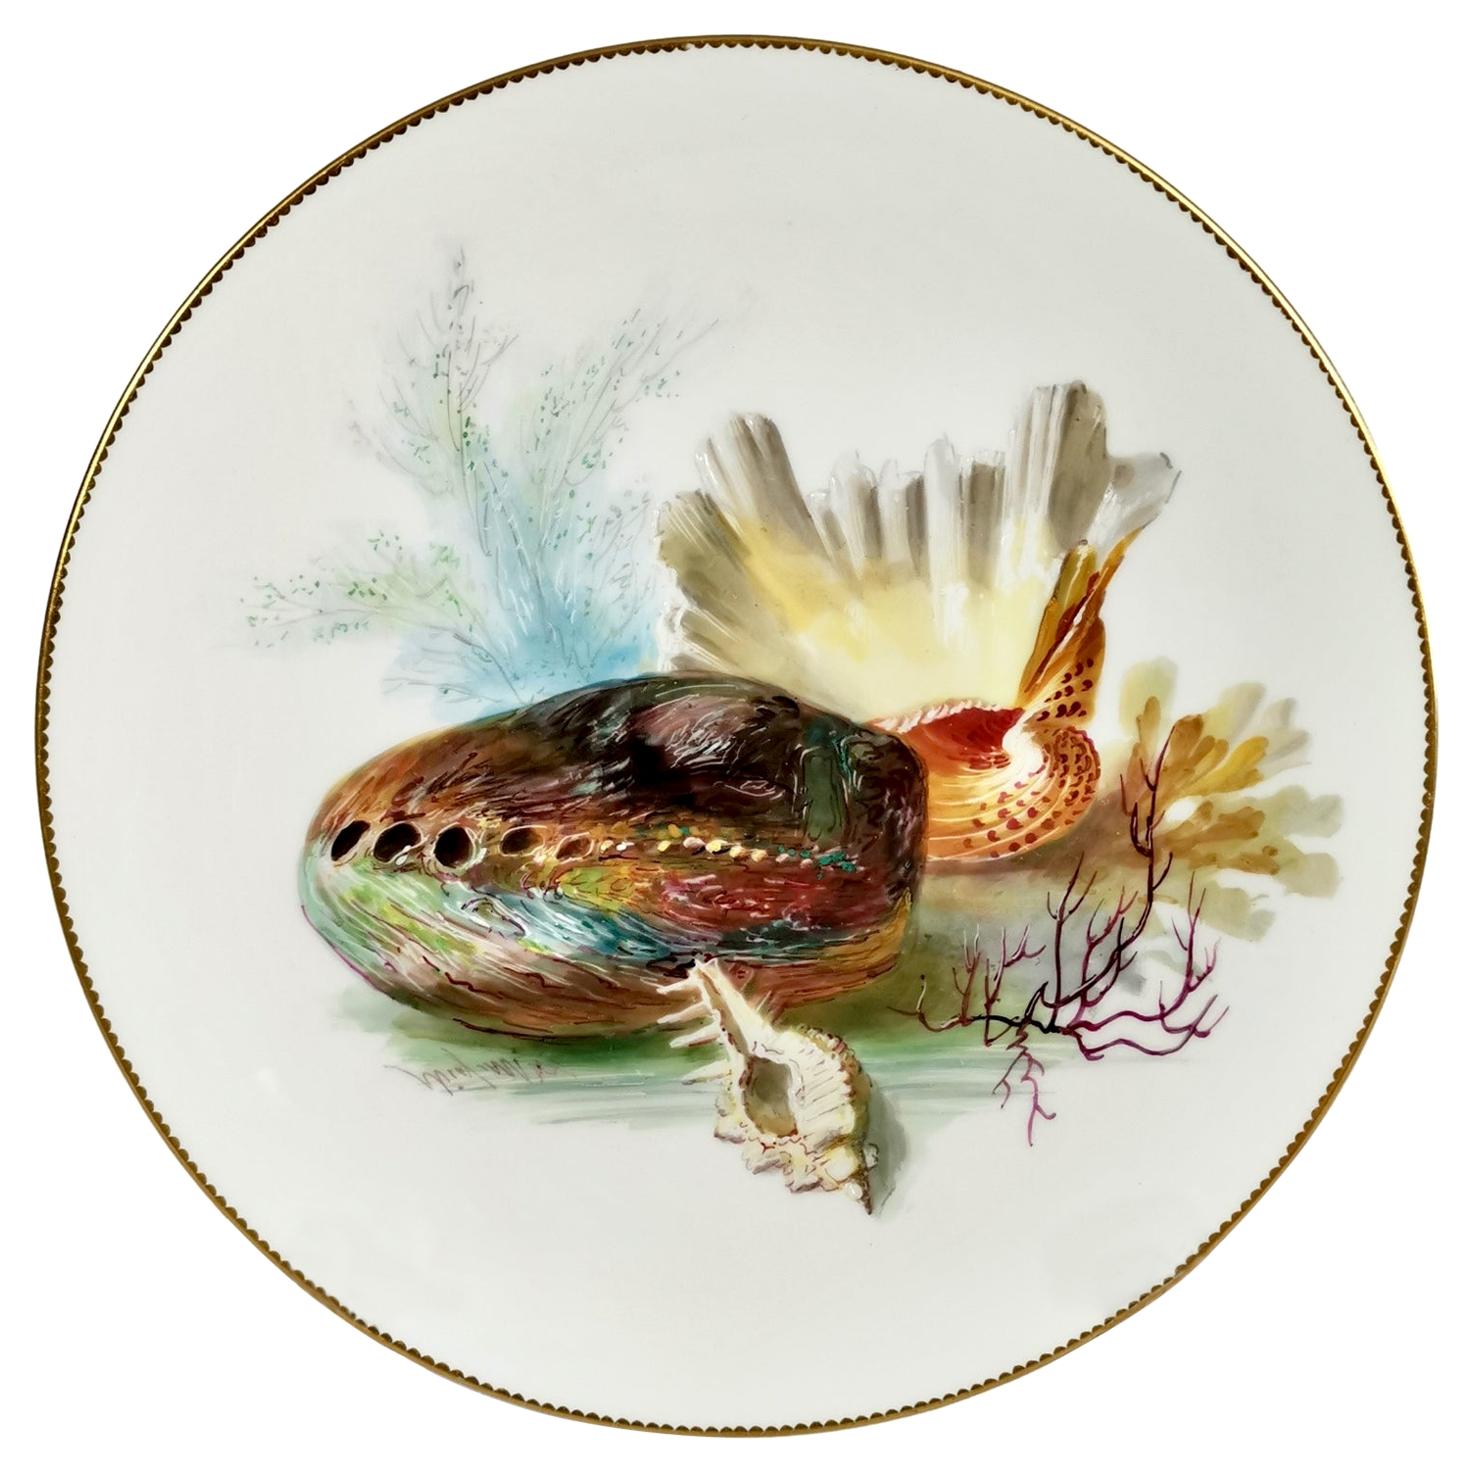 Porcelain Plate, Minton, Sea Shells by W. Mussill, Victorian, 1891